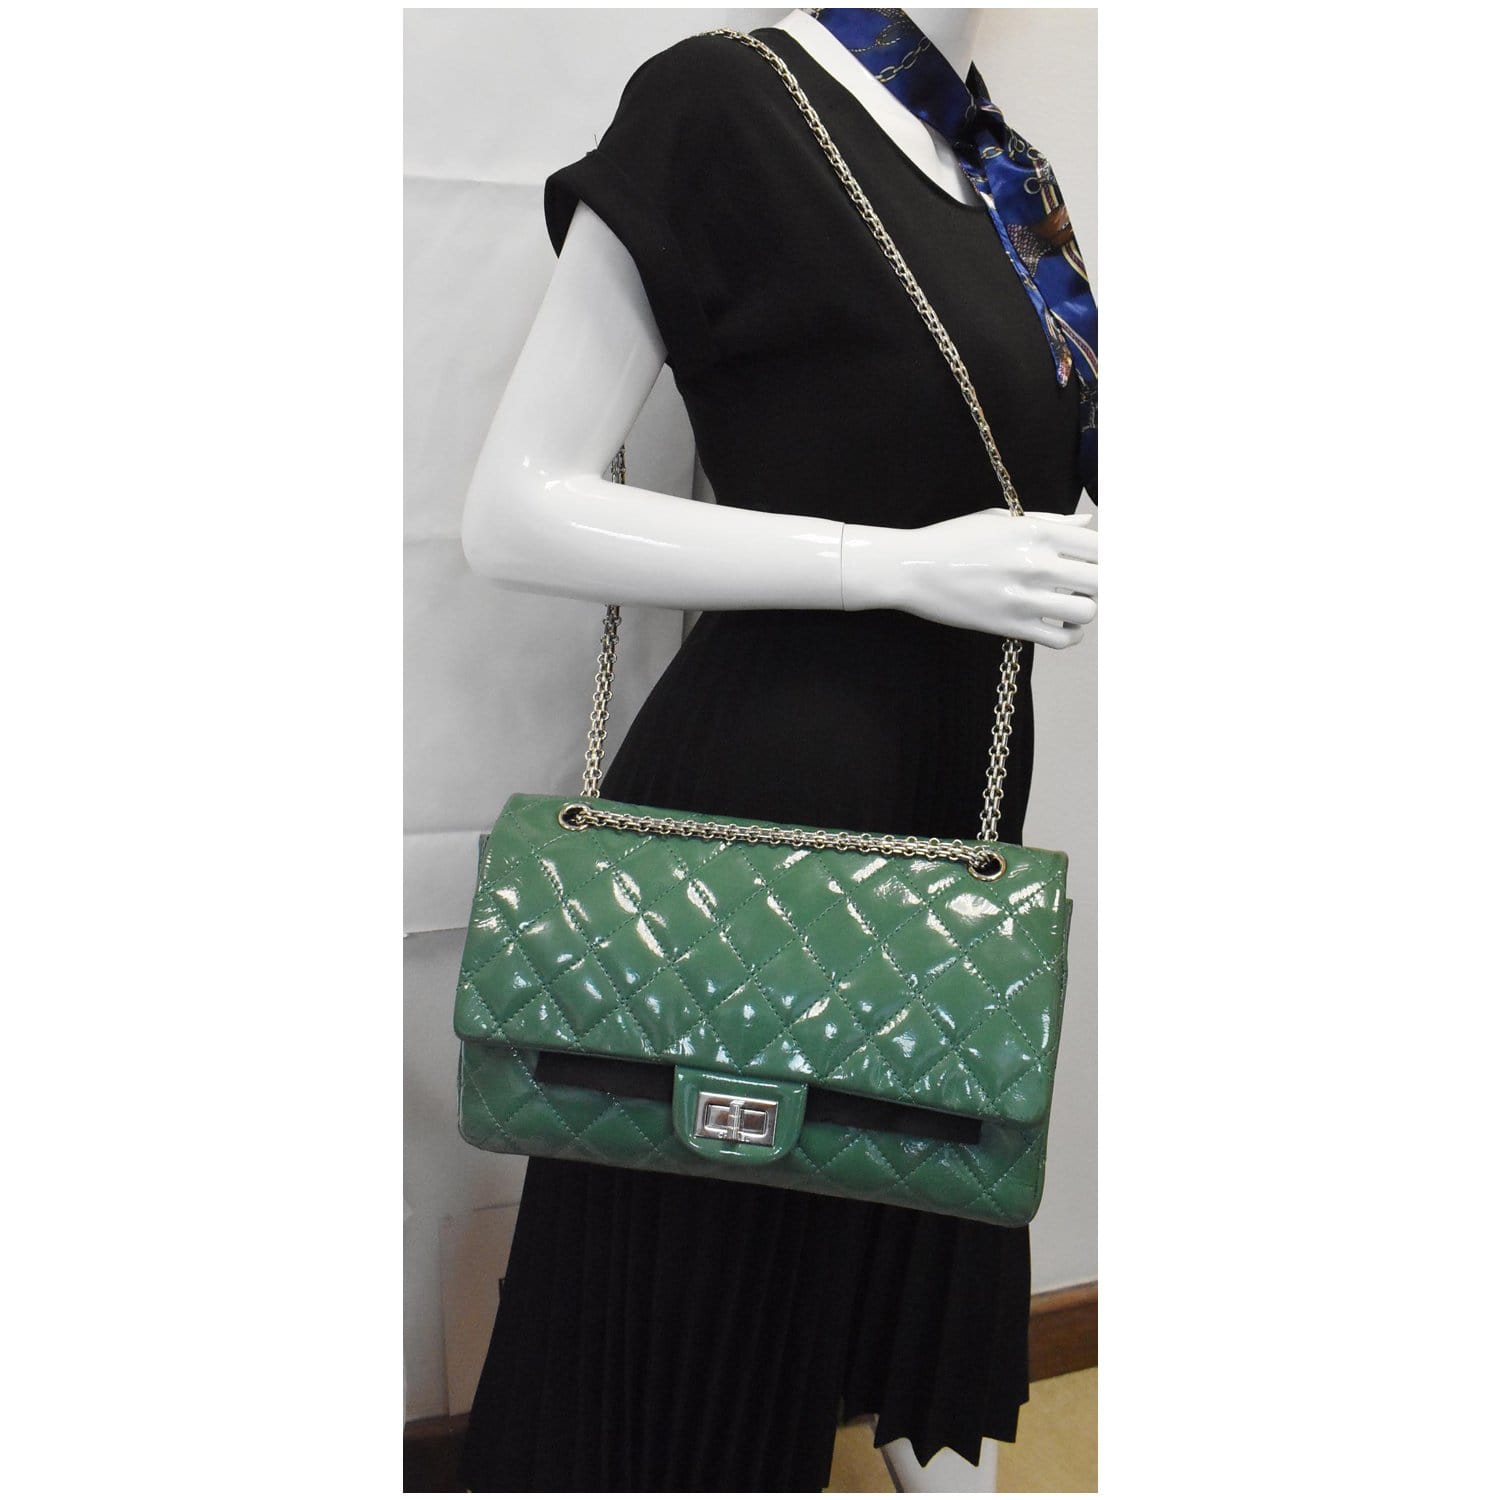 A METALLIC GREEN CALFSKIN LEATHER 2.55 REISSUE 225 DOUBLE FLAP WITH BRUSHED  GOLD HARDWARE, CHANEL, 2019